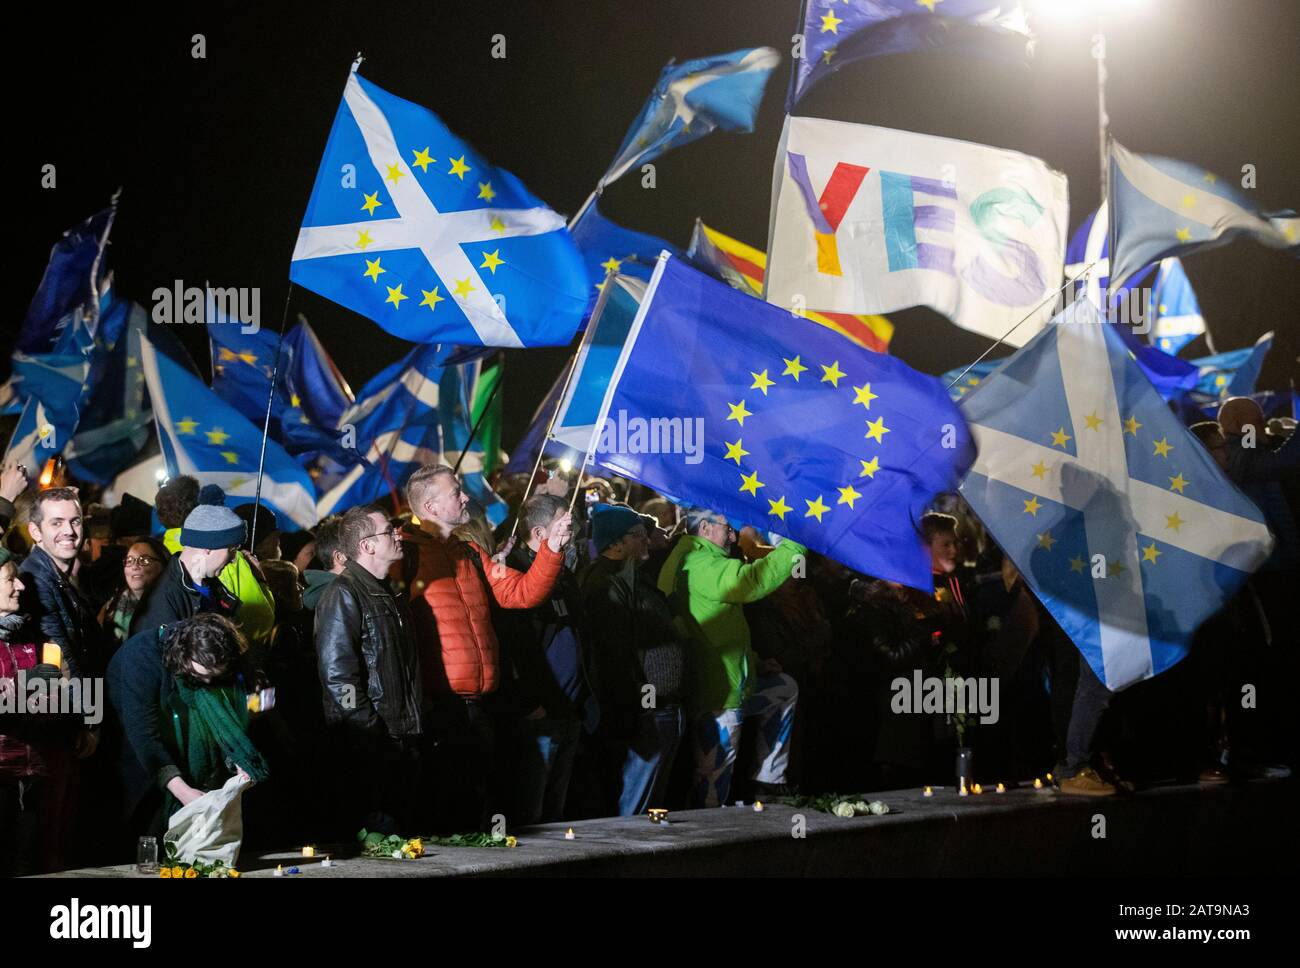 Pro-European supporters outside the Scottish Parliament in Edinburgh, after the UK left the European Union on Friday, ending 47 years of close and sometimes uncomfortable ties to Brussels. Stock Photo